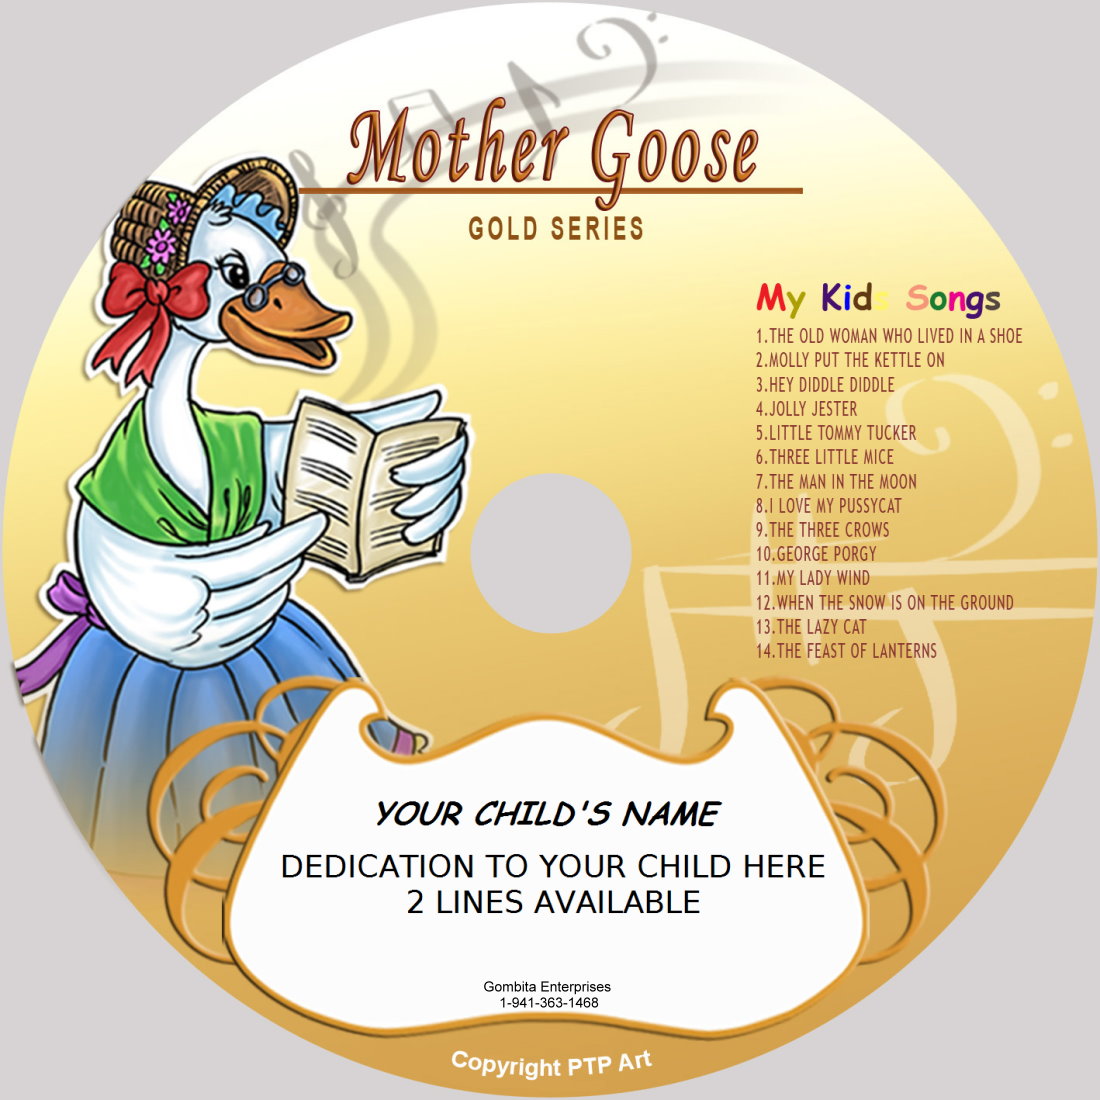 Mother Goose (Gold) - My Kids Songs - MP3 Downloads